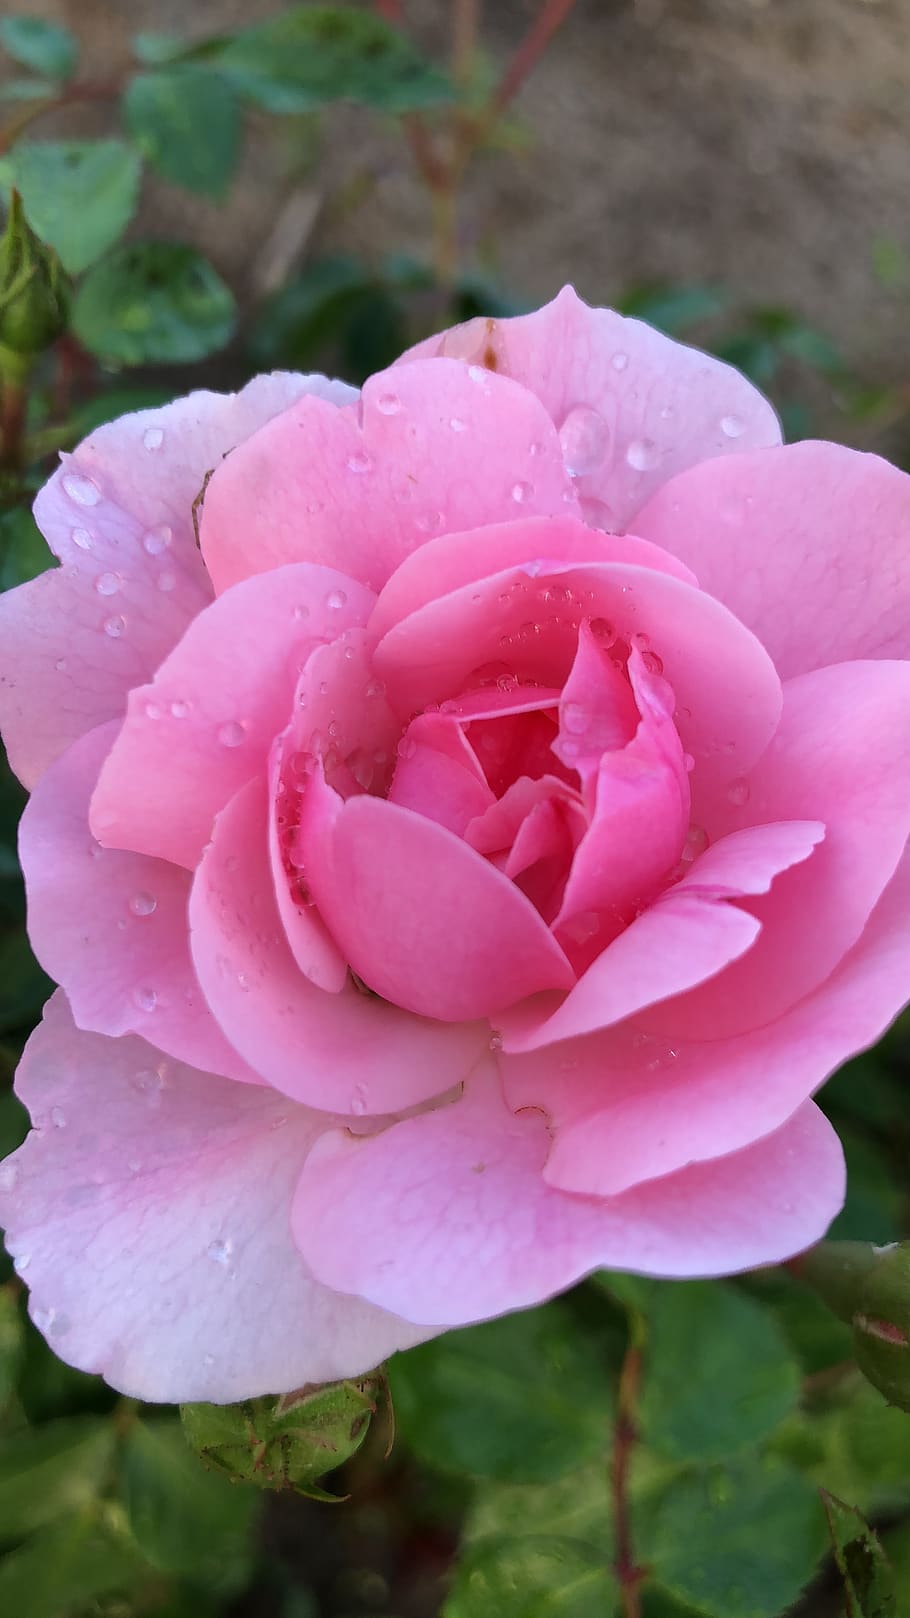 pink, rose, water, pink color, plant, flower, beauty in nature, flowering plant, petal, fragility